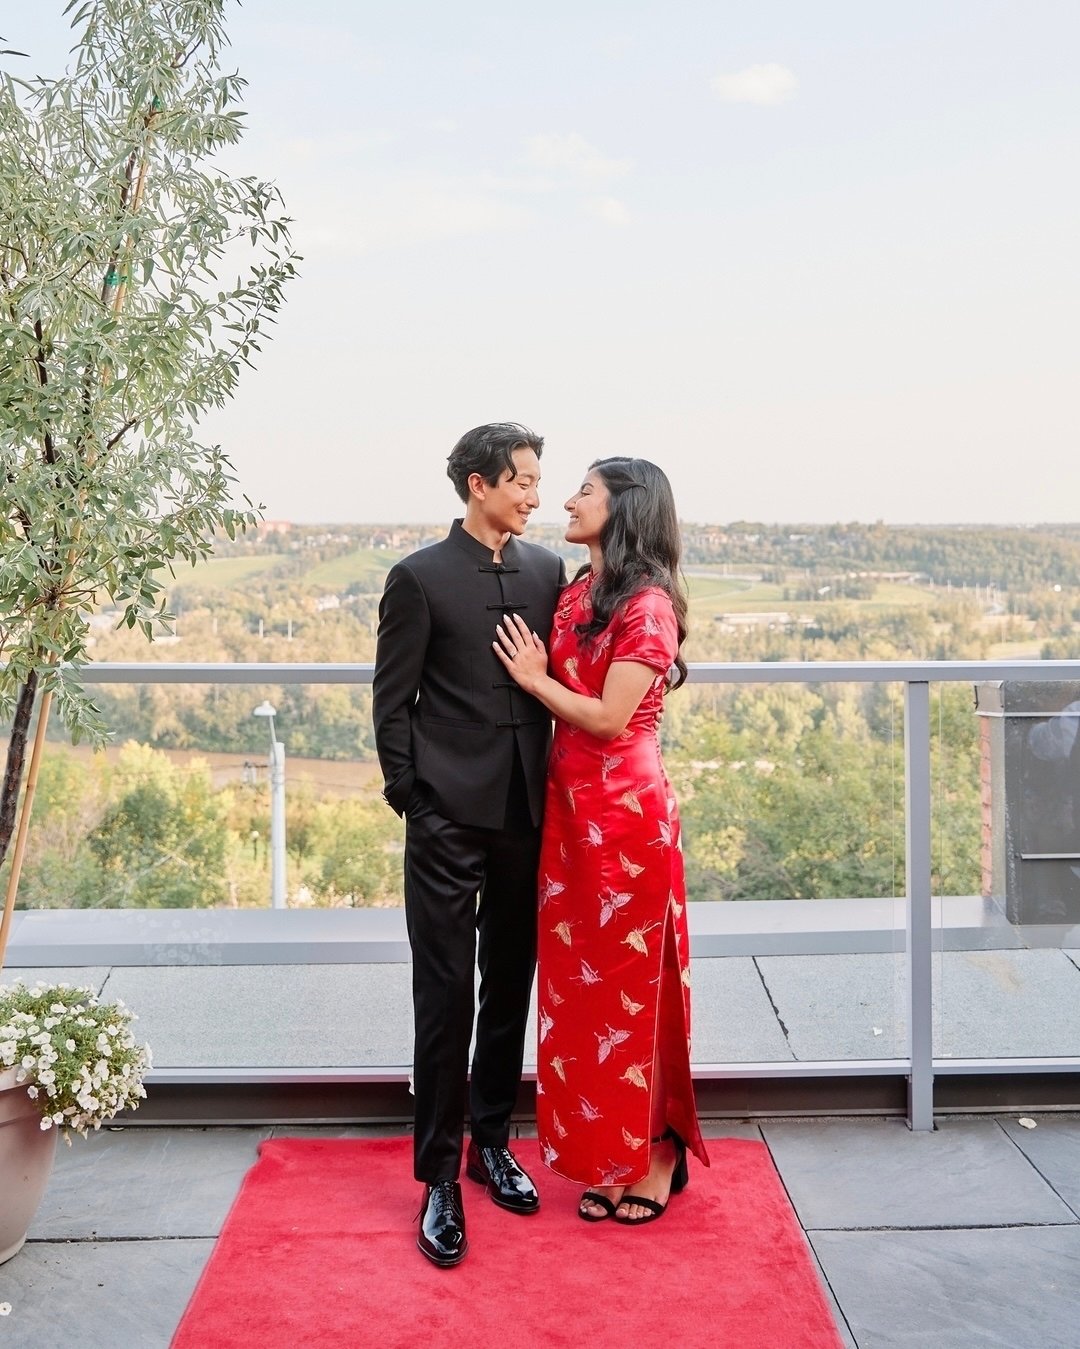 We absolutely love how Saba and Brandon brought both their cultural traditions to their wedding day. 

Ceremony in the ballroom for her
Balcony tea ceremony for him
Reception for them both

What a way to celebrate their perfect match.

Photographer @